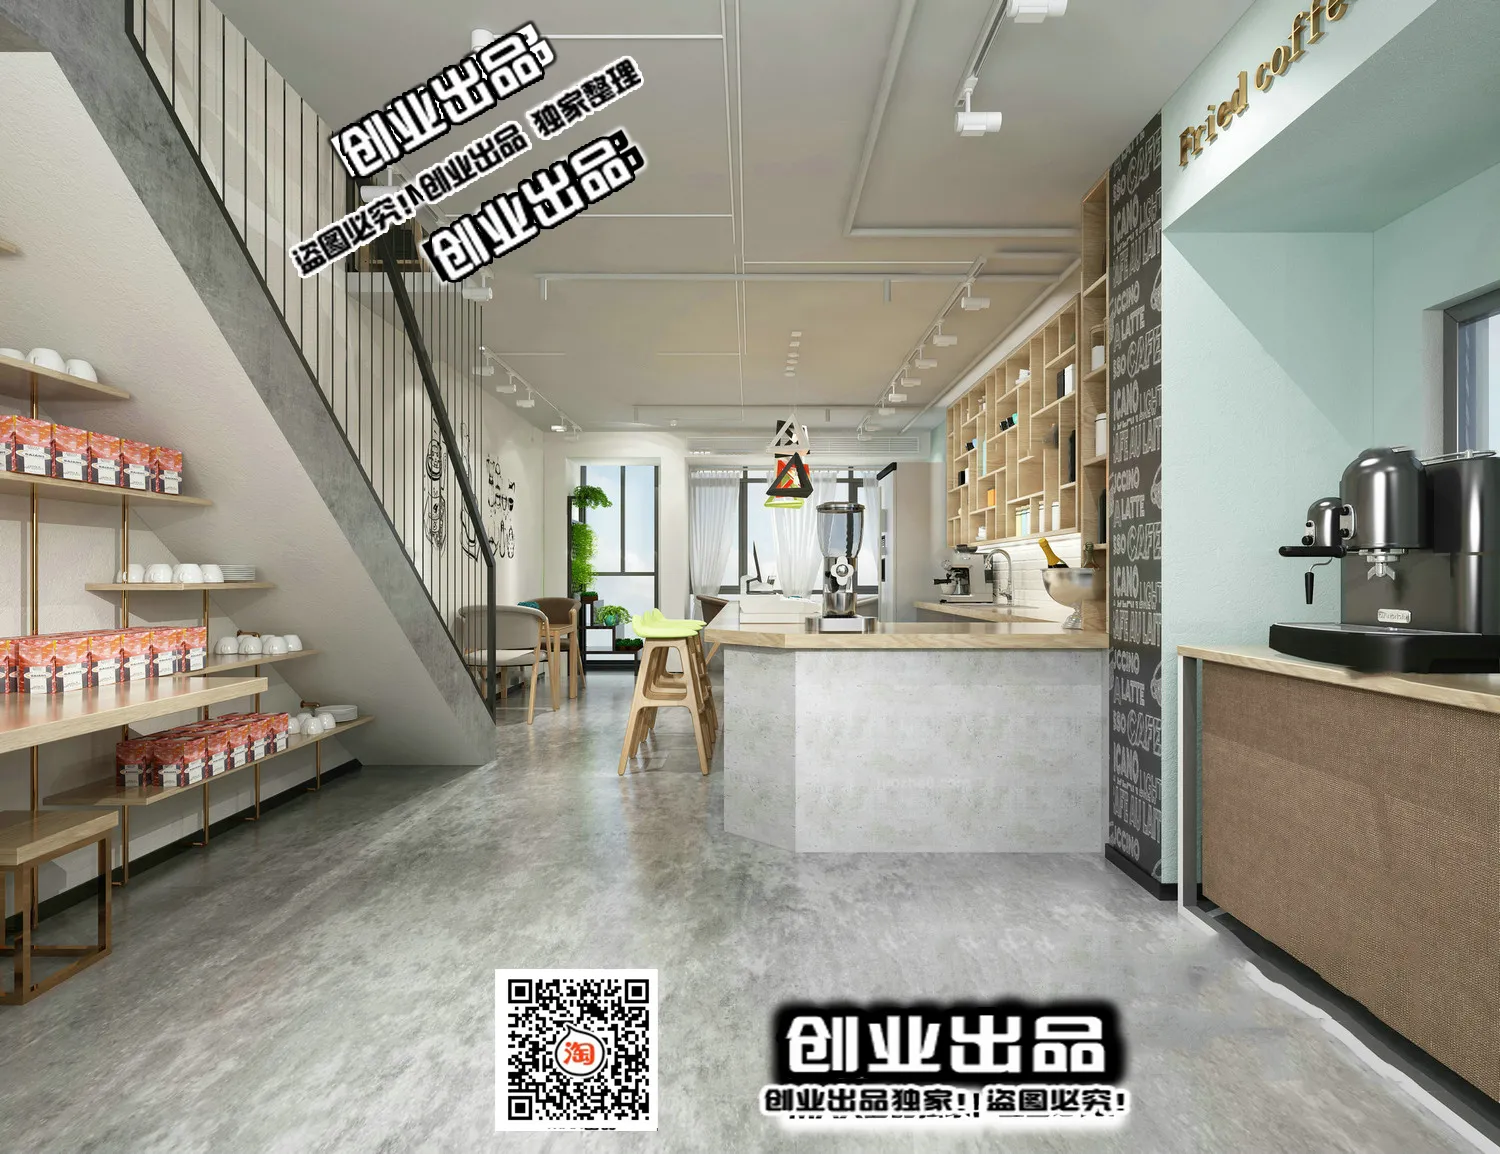 FASTFOOD STORE – 3D SCENES – 0223